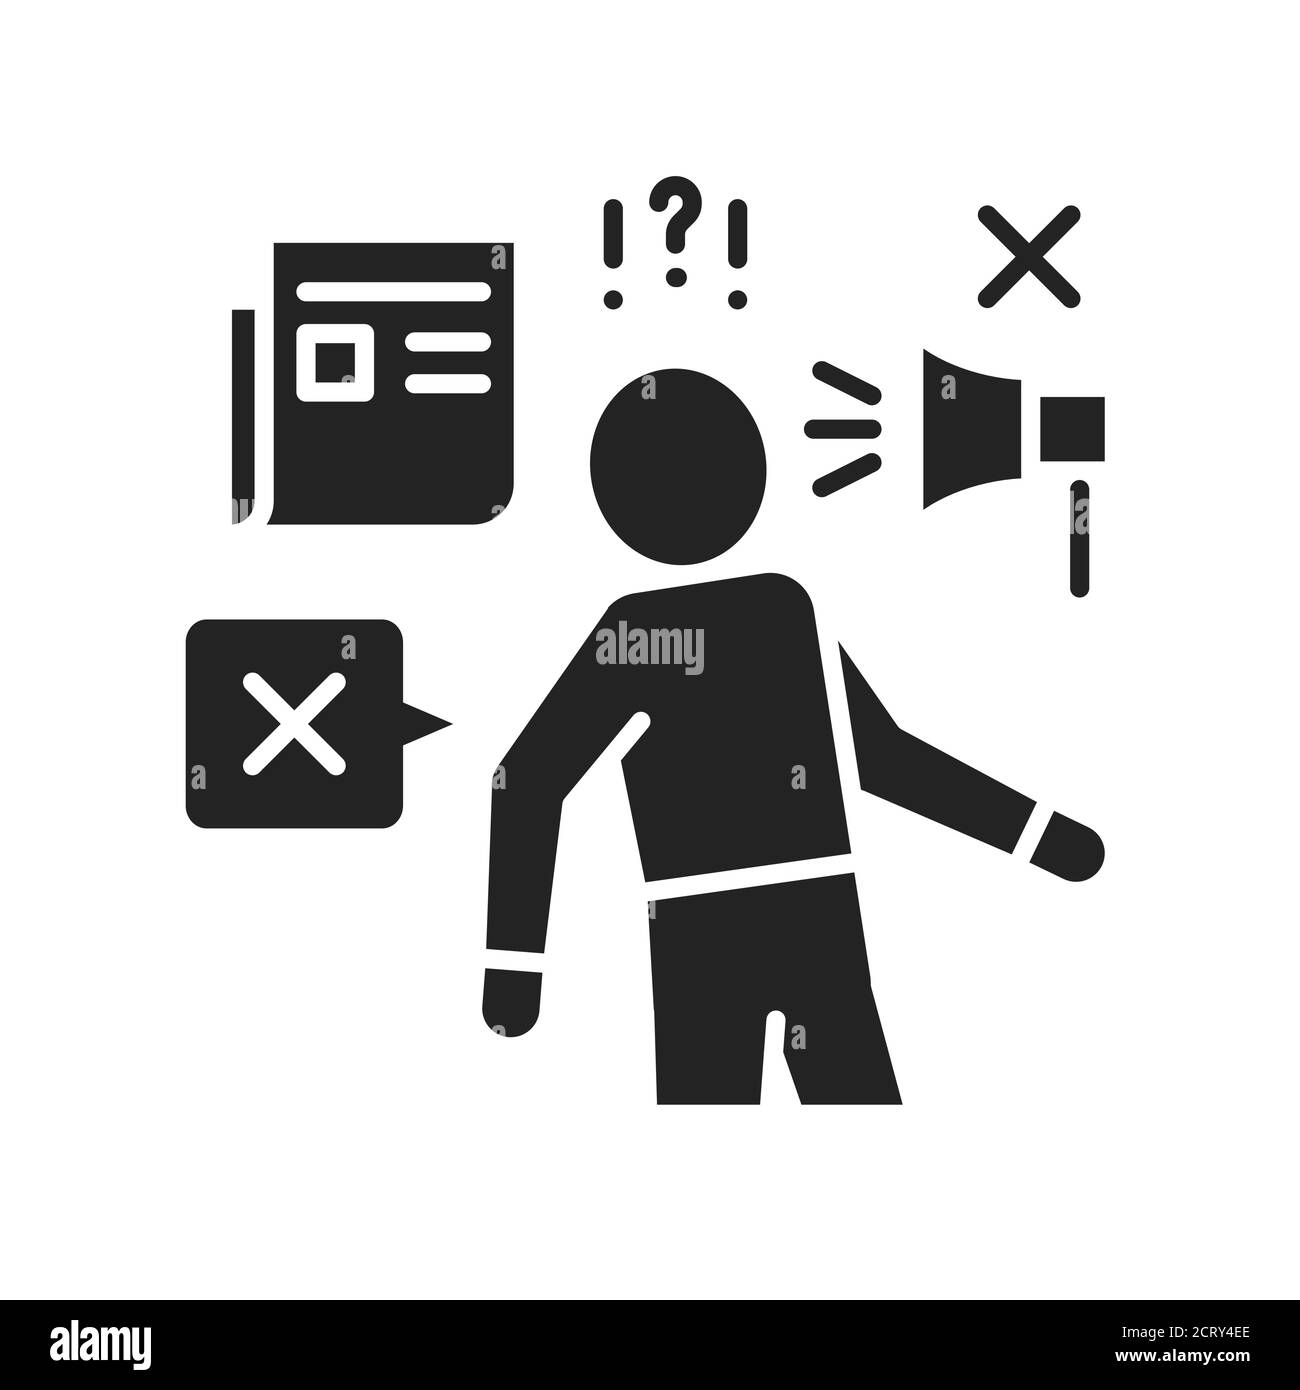 Discredit black glyph icon. Humiliation, insulting a person concept. Sign for web page, mobile app, button, logo. Stock Vector